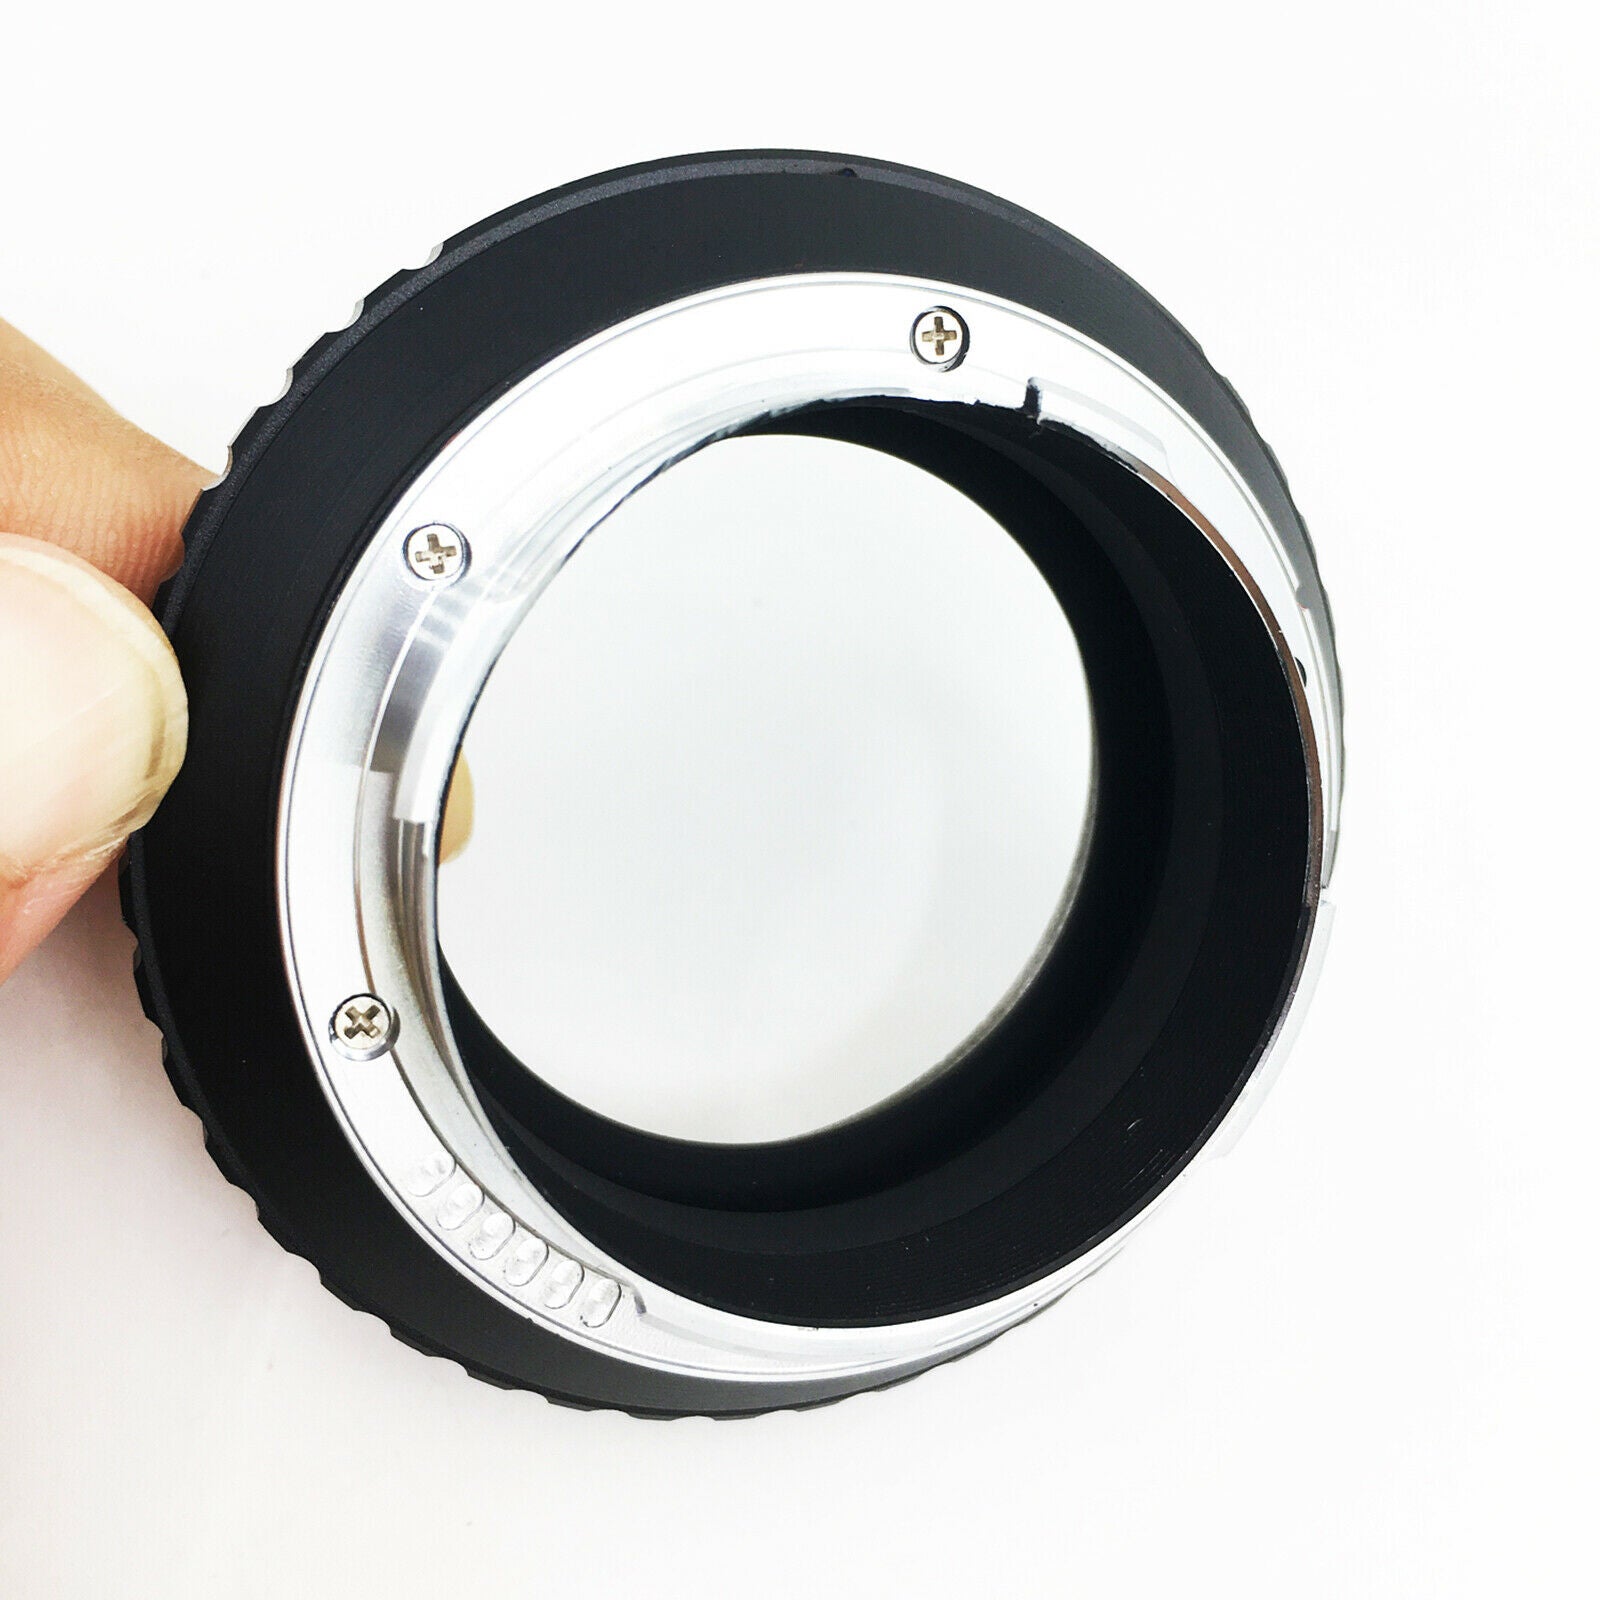 M42-LM Manual Lens Adapter Converter for Techart LM-EA7 for